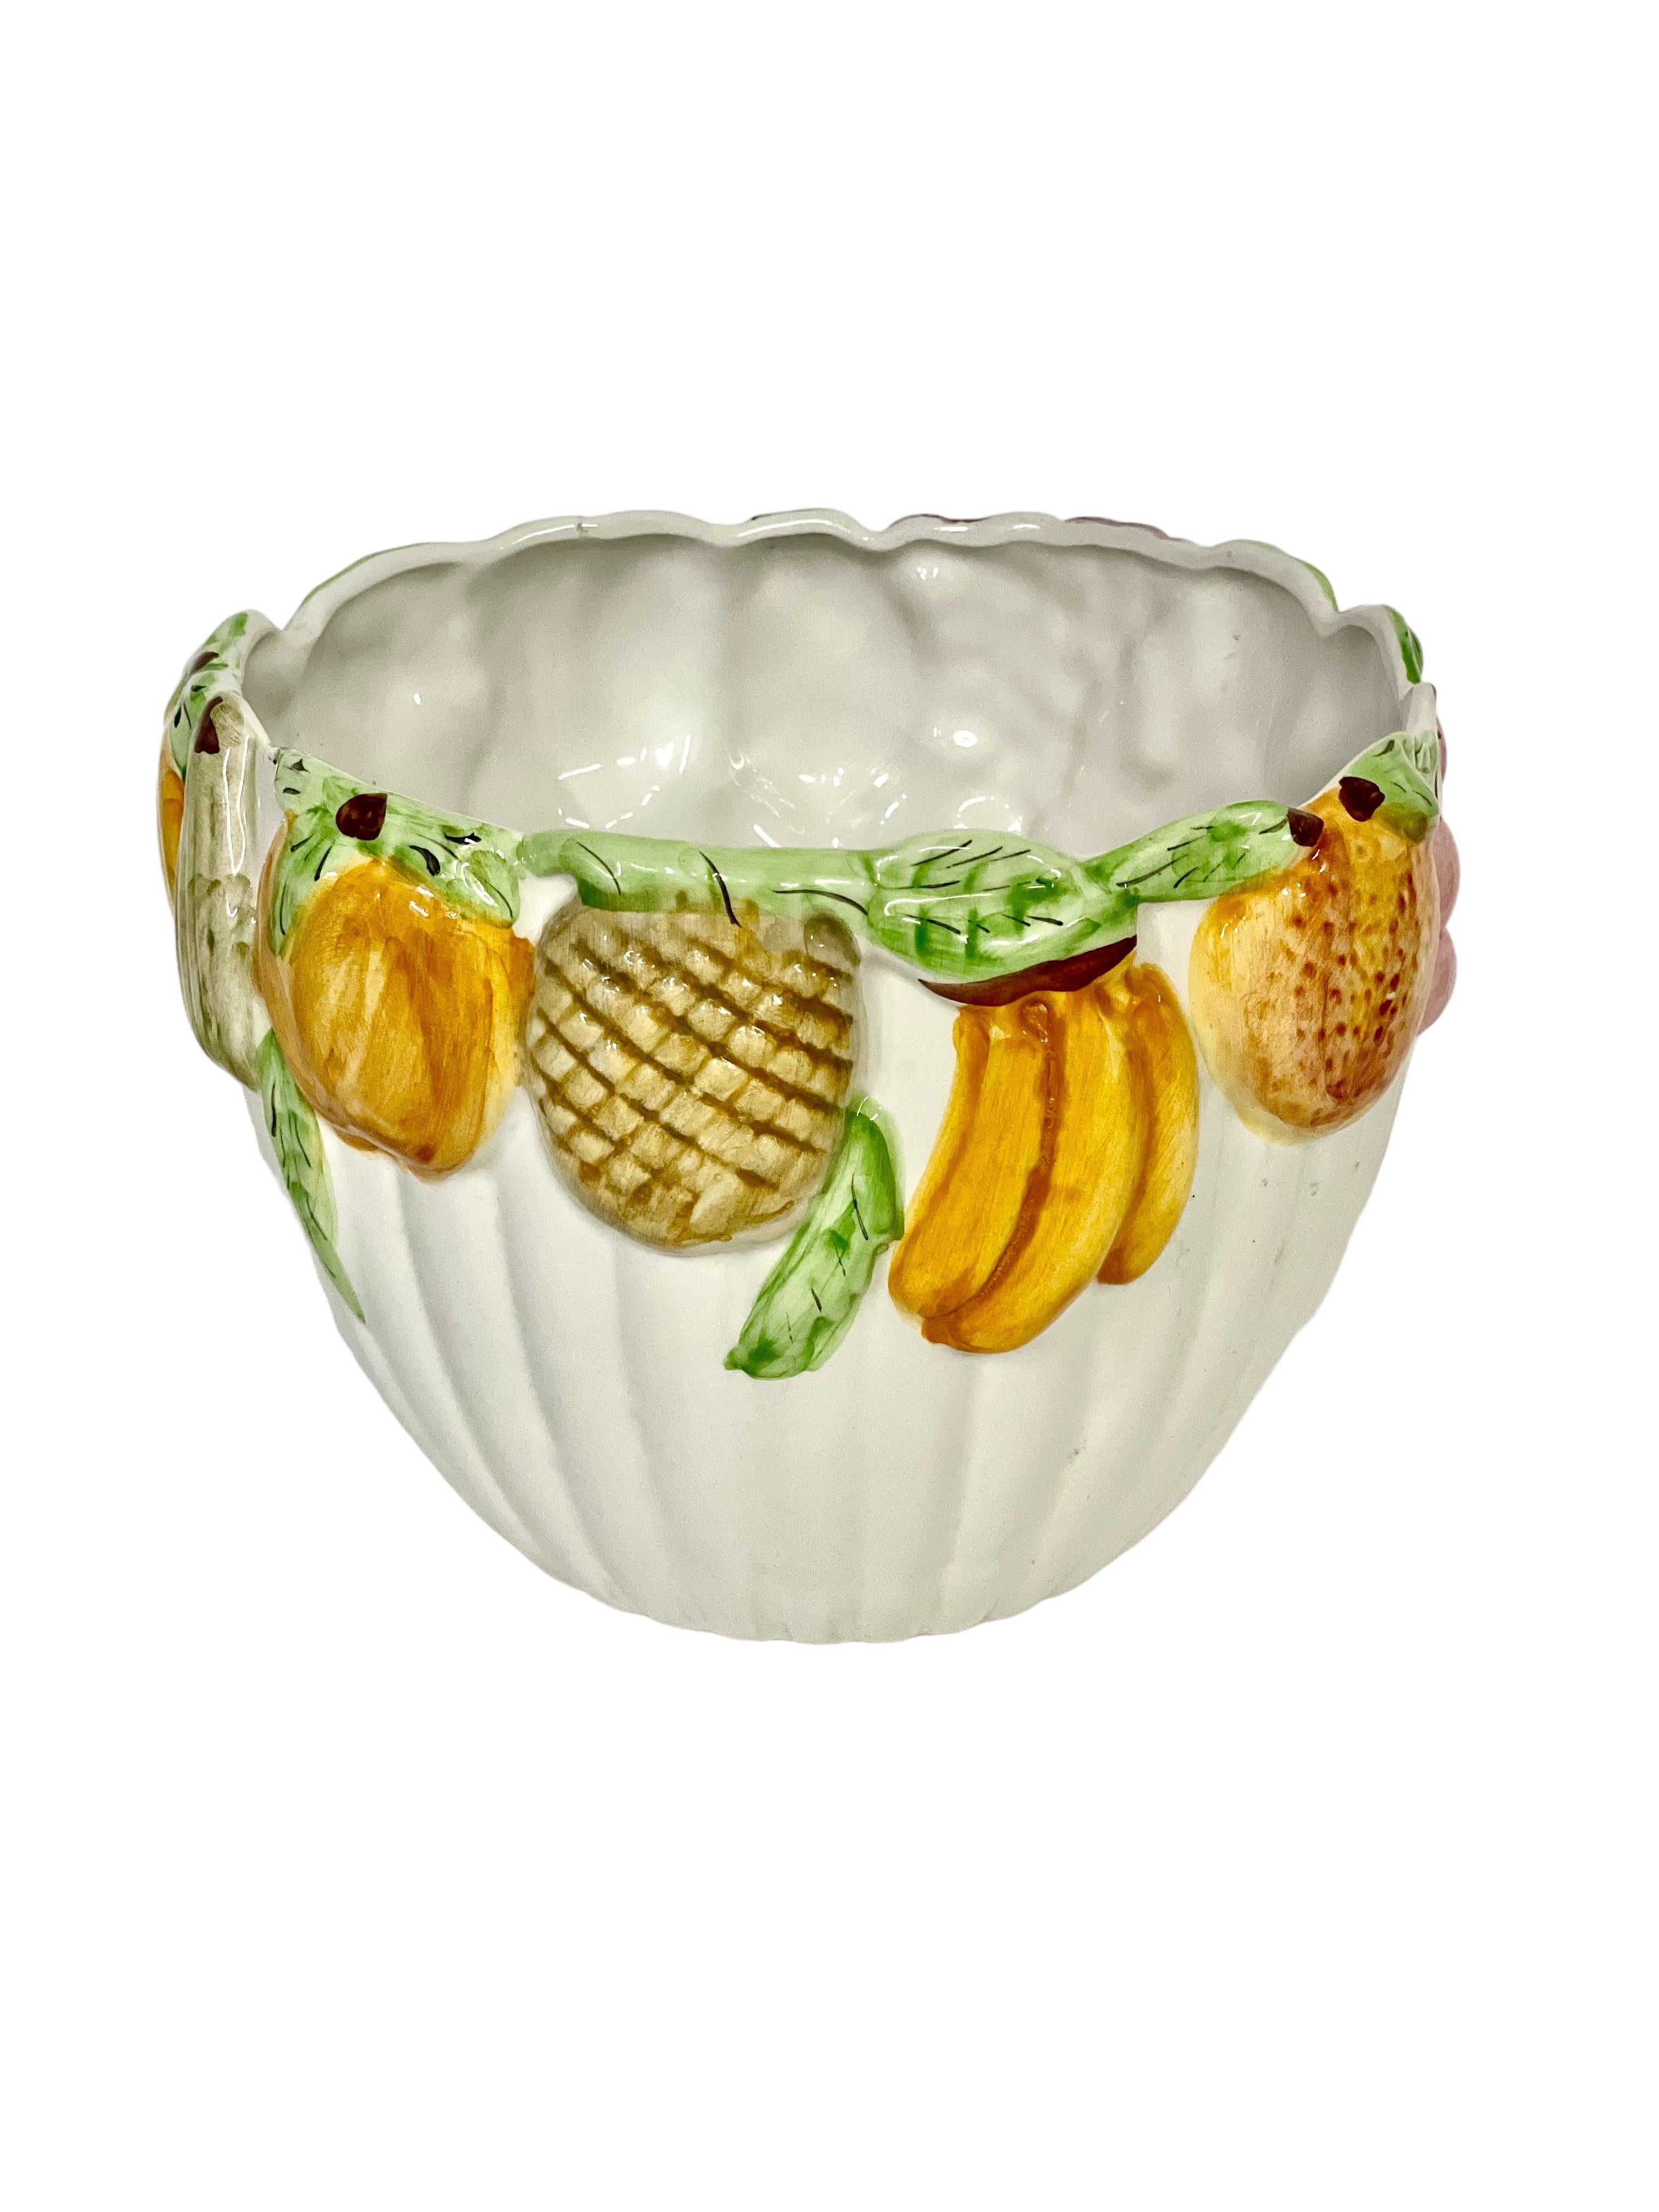 Majolica Cache Pot with Fruit Decoration, 19th Century For Sale 2